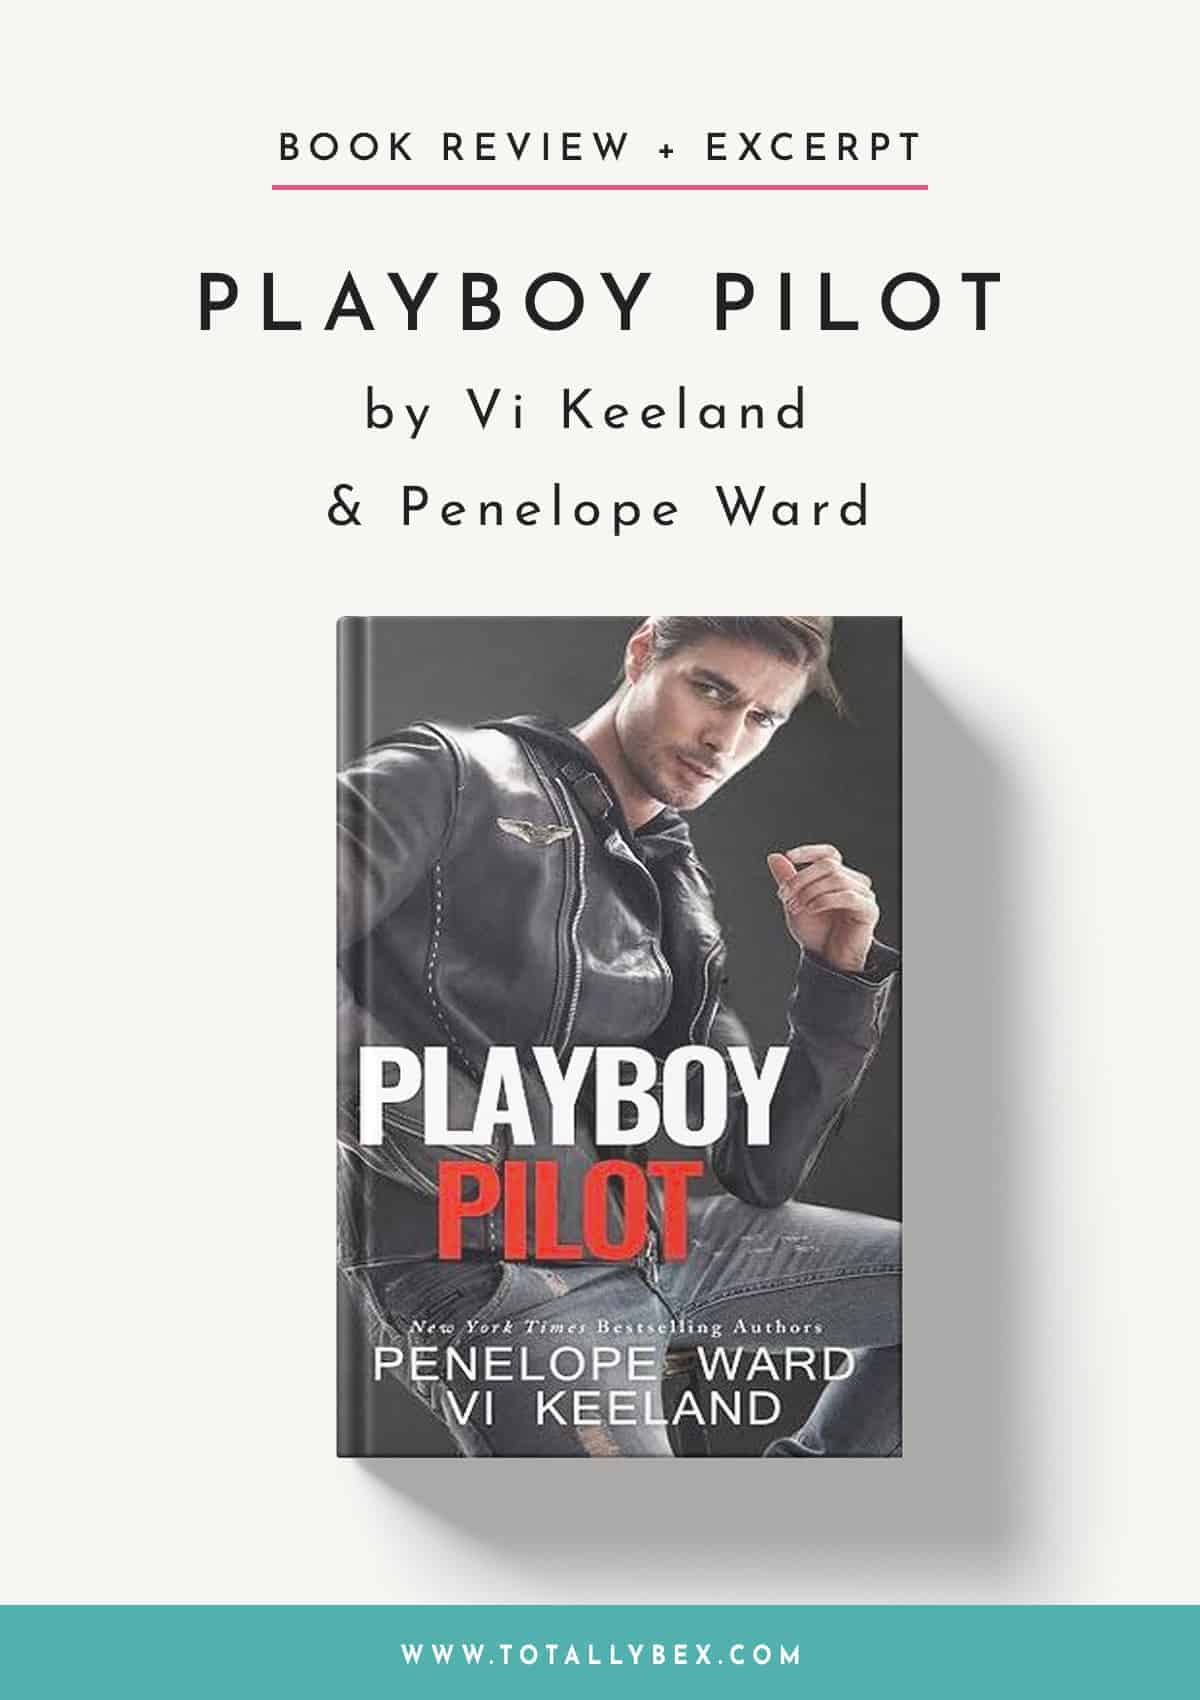 Playboy Pilot by Penelope Ward and Vi Keeland – Love in Exotic Locales!